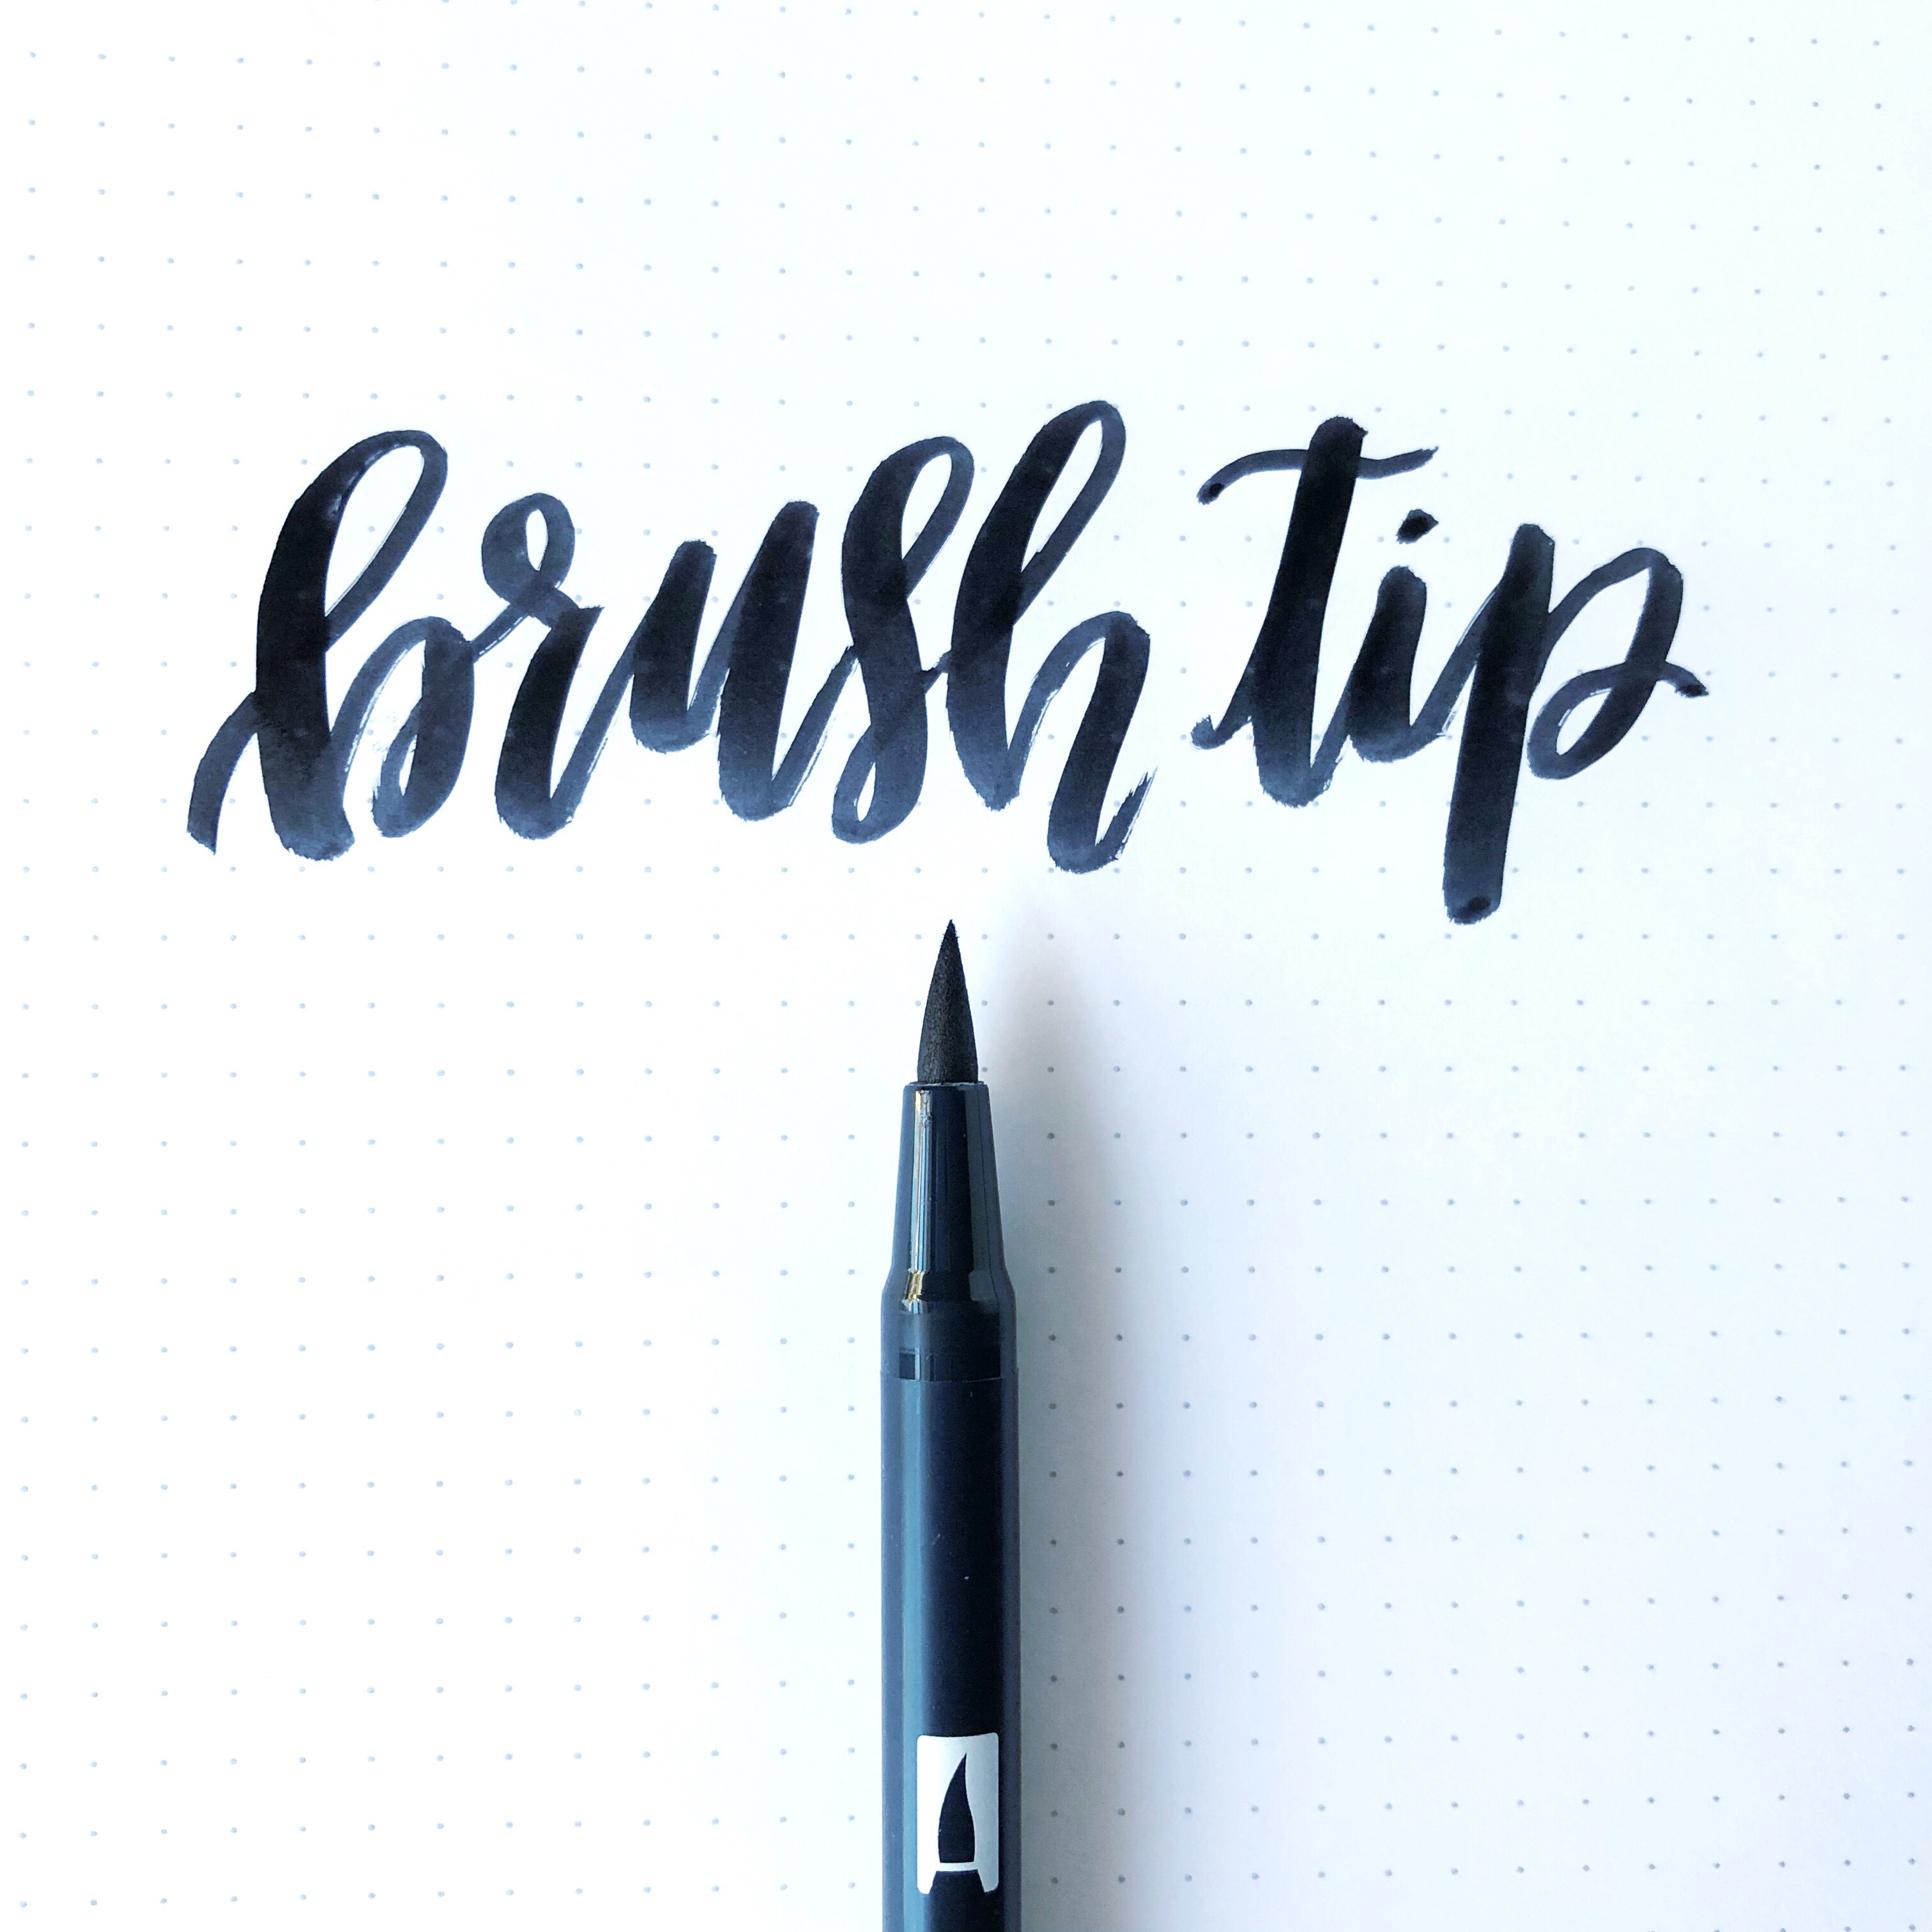 5 Tips to Lettering with Tombow Dual Brush Pens - Tombow USA Blog